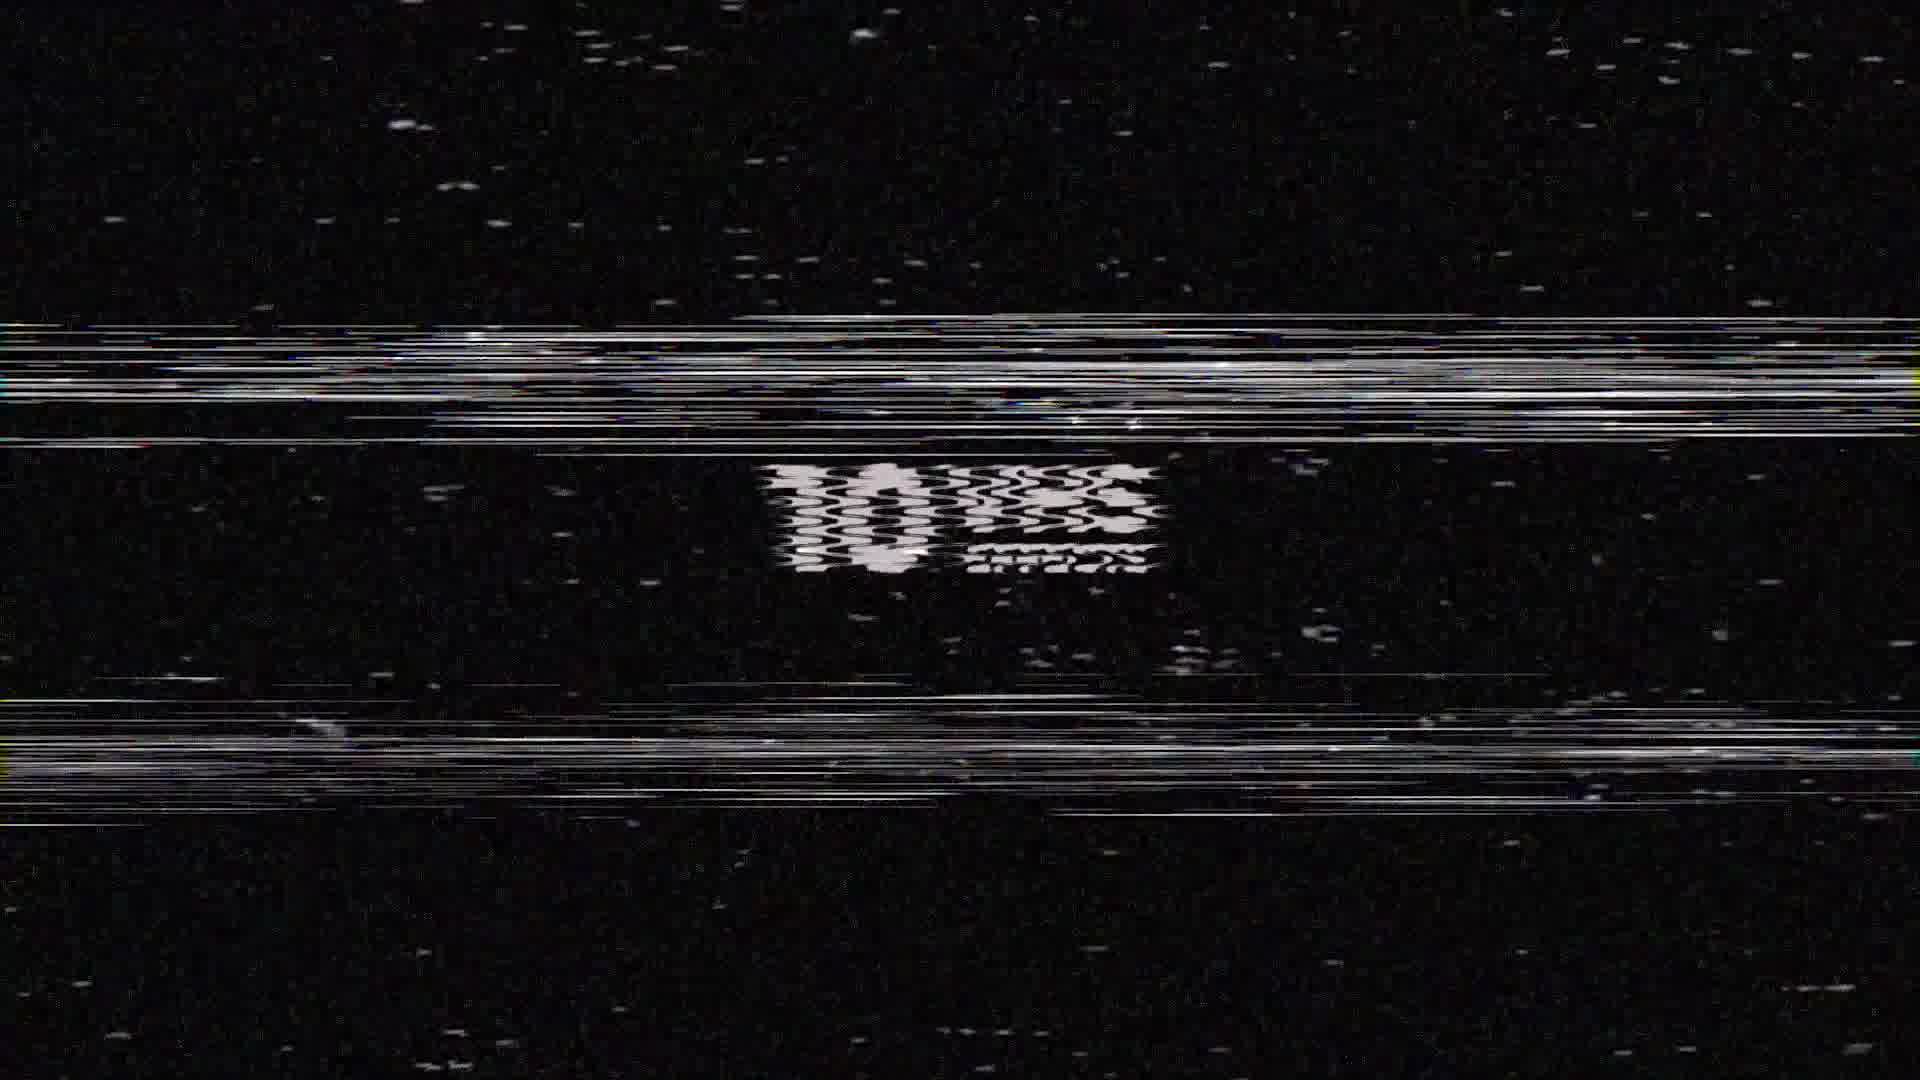 paused vhs effect premiere pro